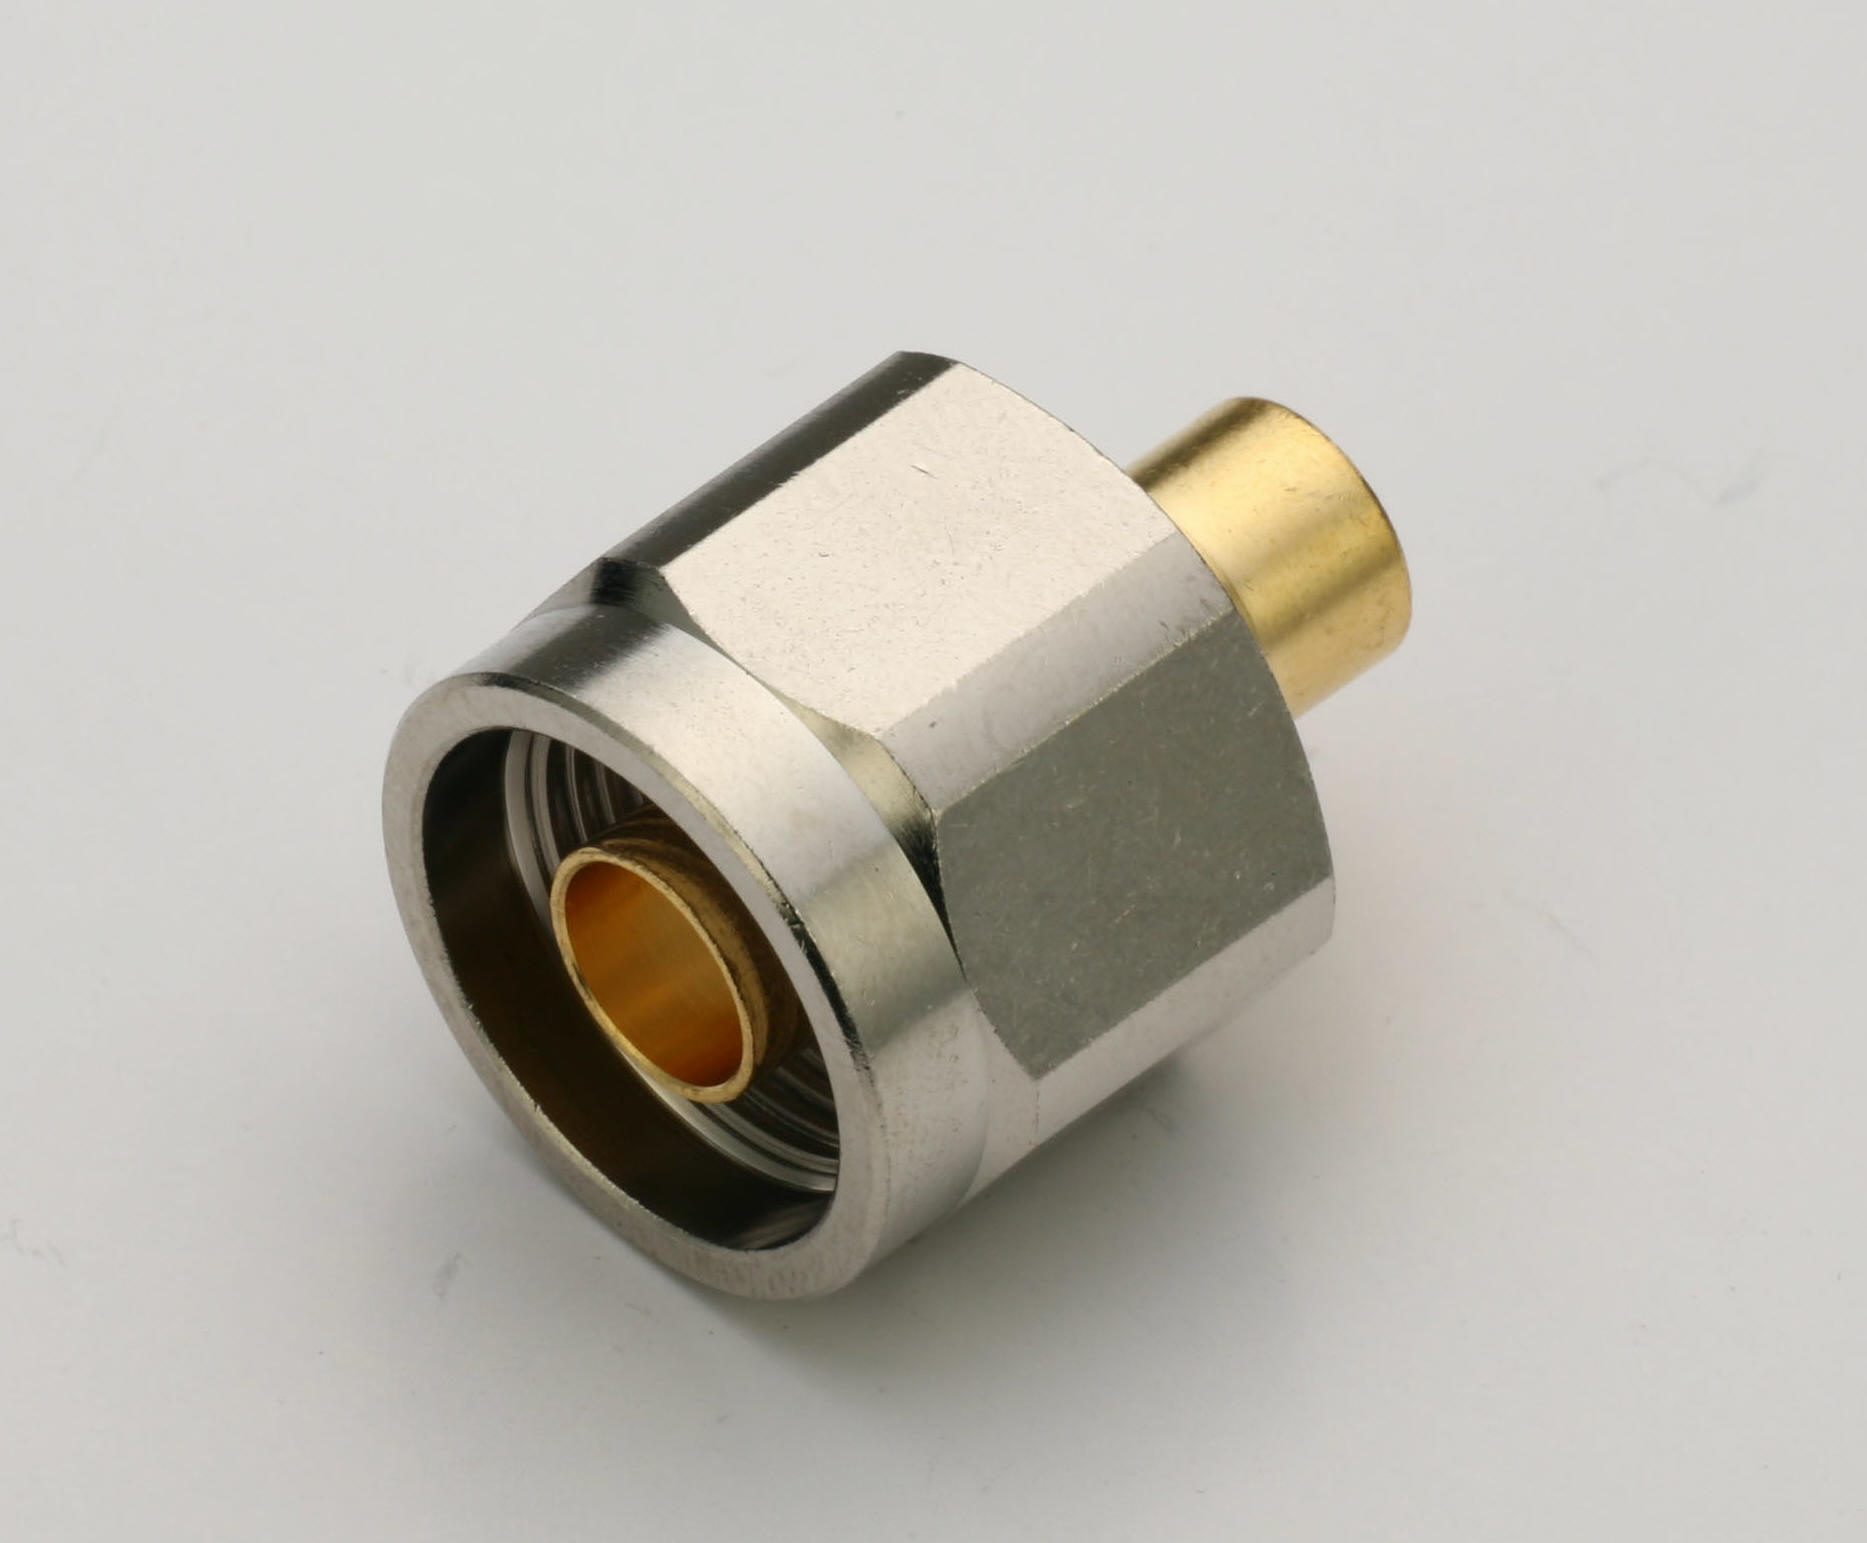 N Straight Plug for SR250 with Hex coupling cap